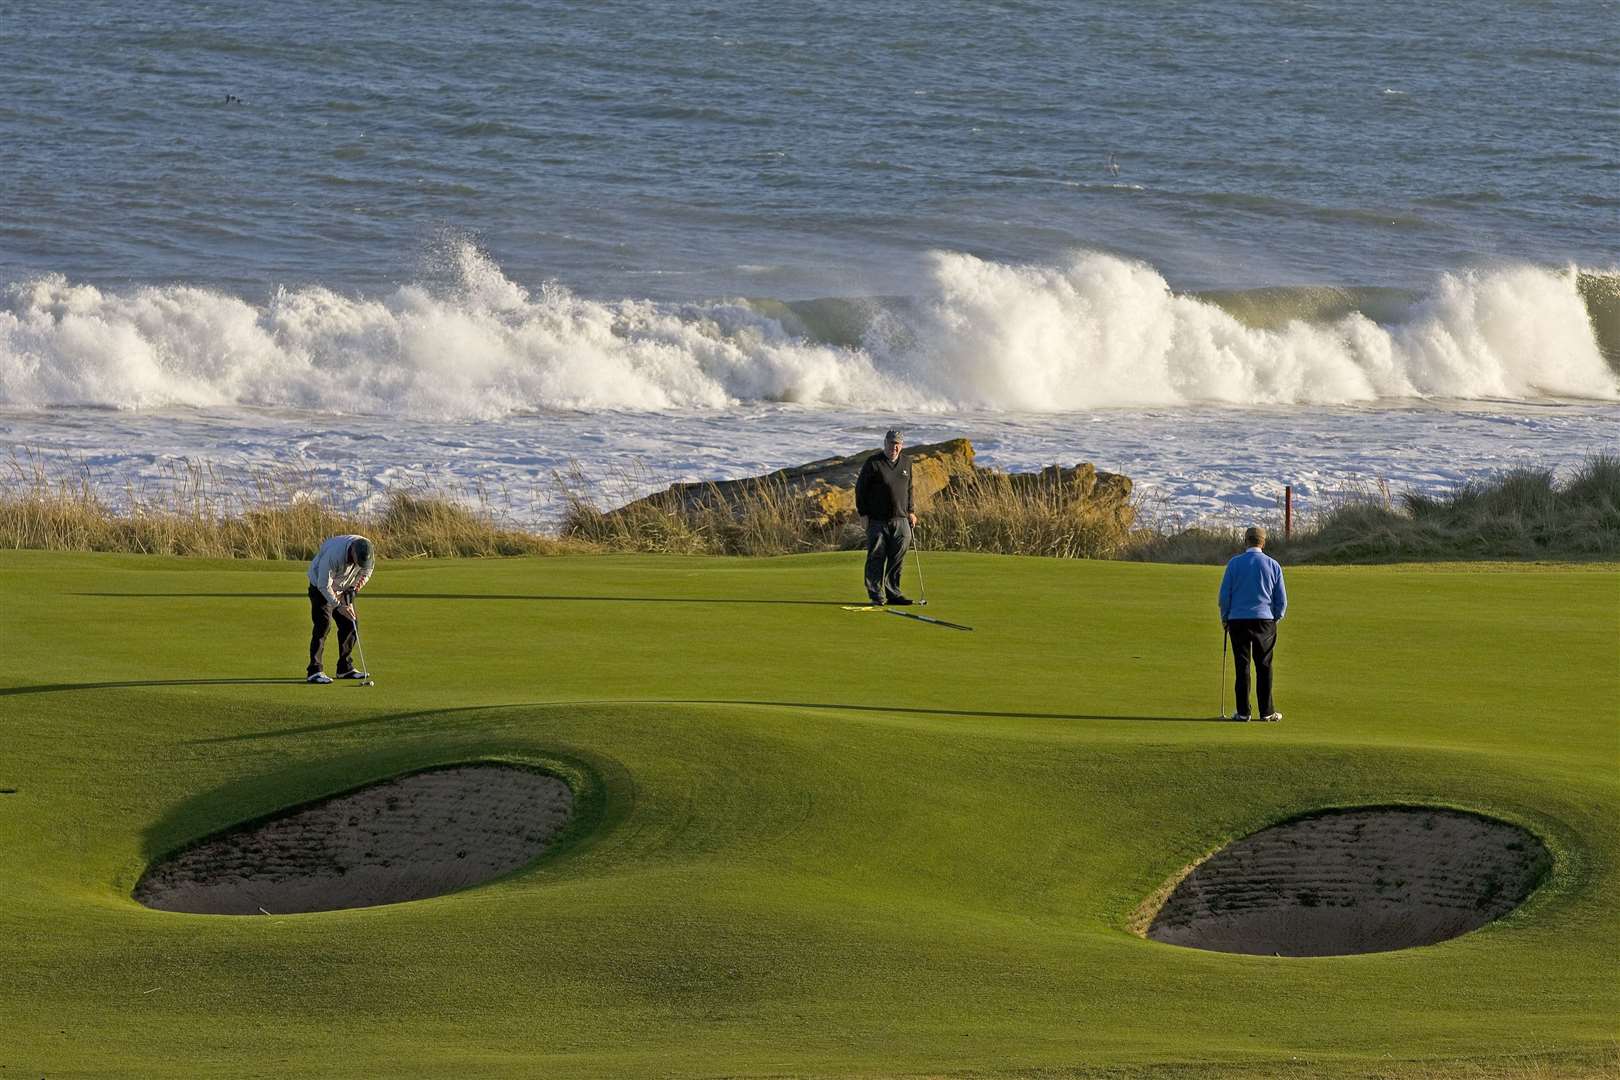 Royal Dornoch Golf Club has been chosen as one of six host venues for the Tartan Pro Tour.